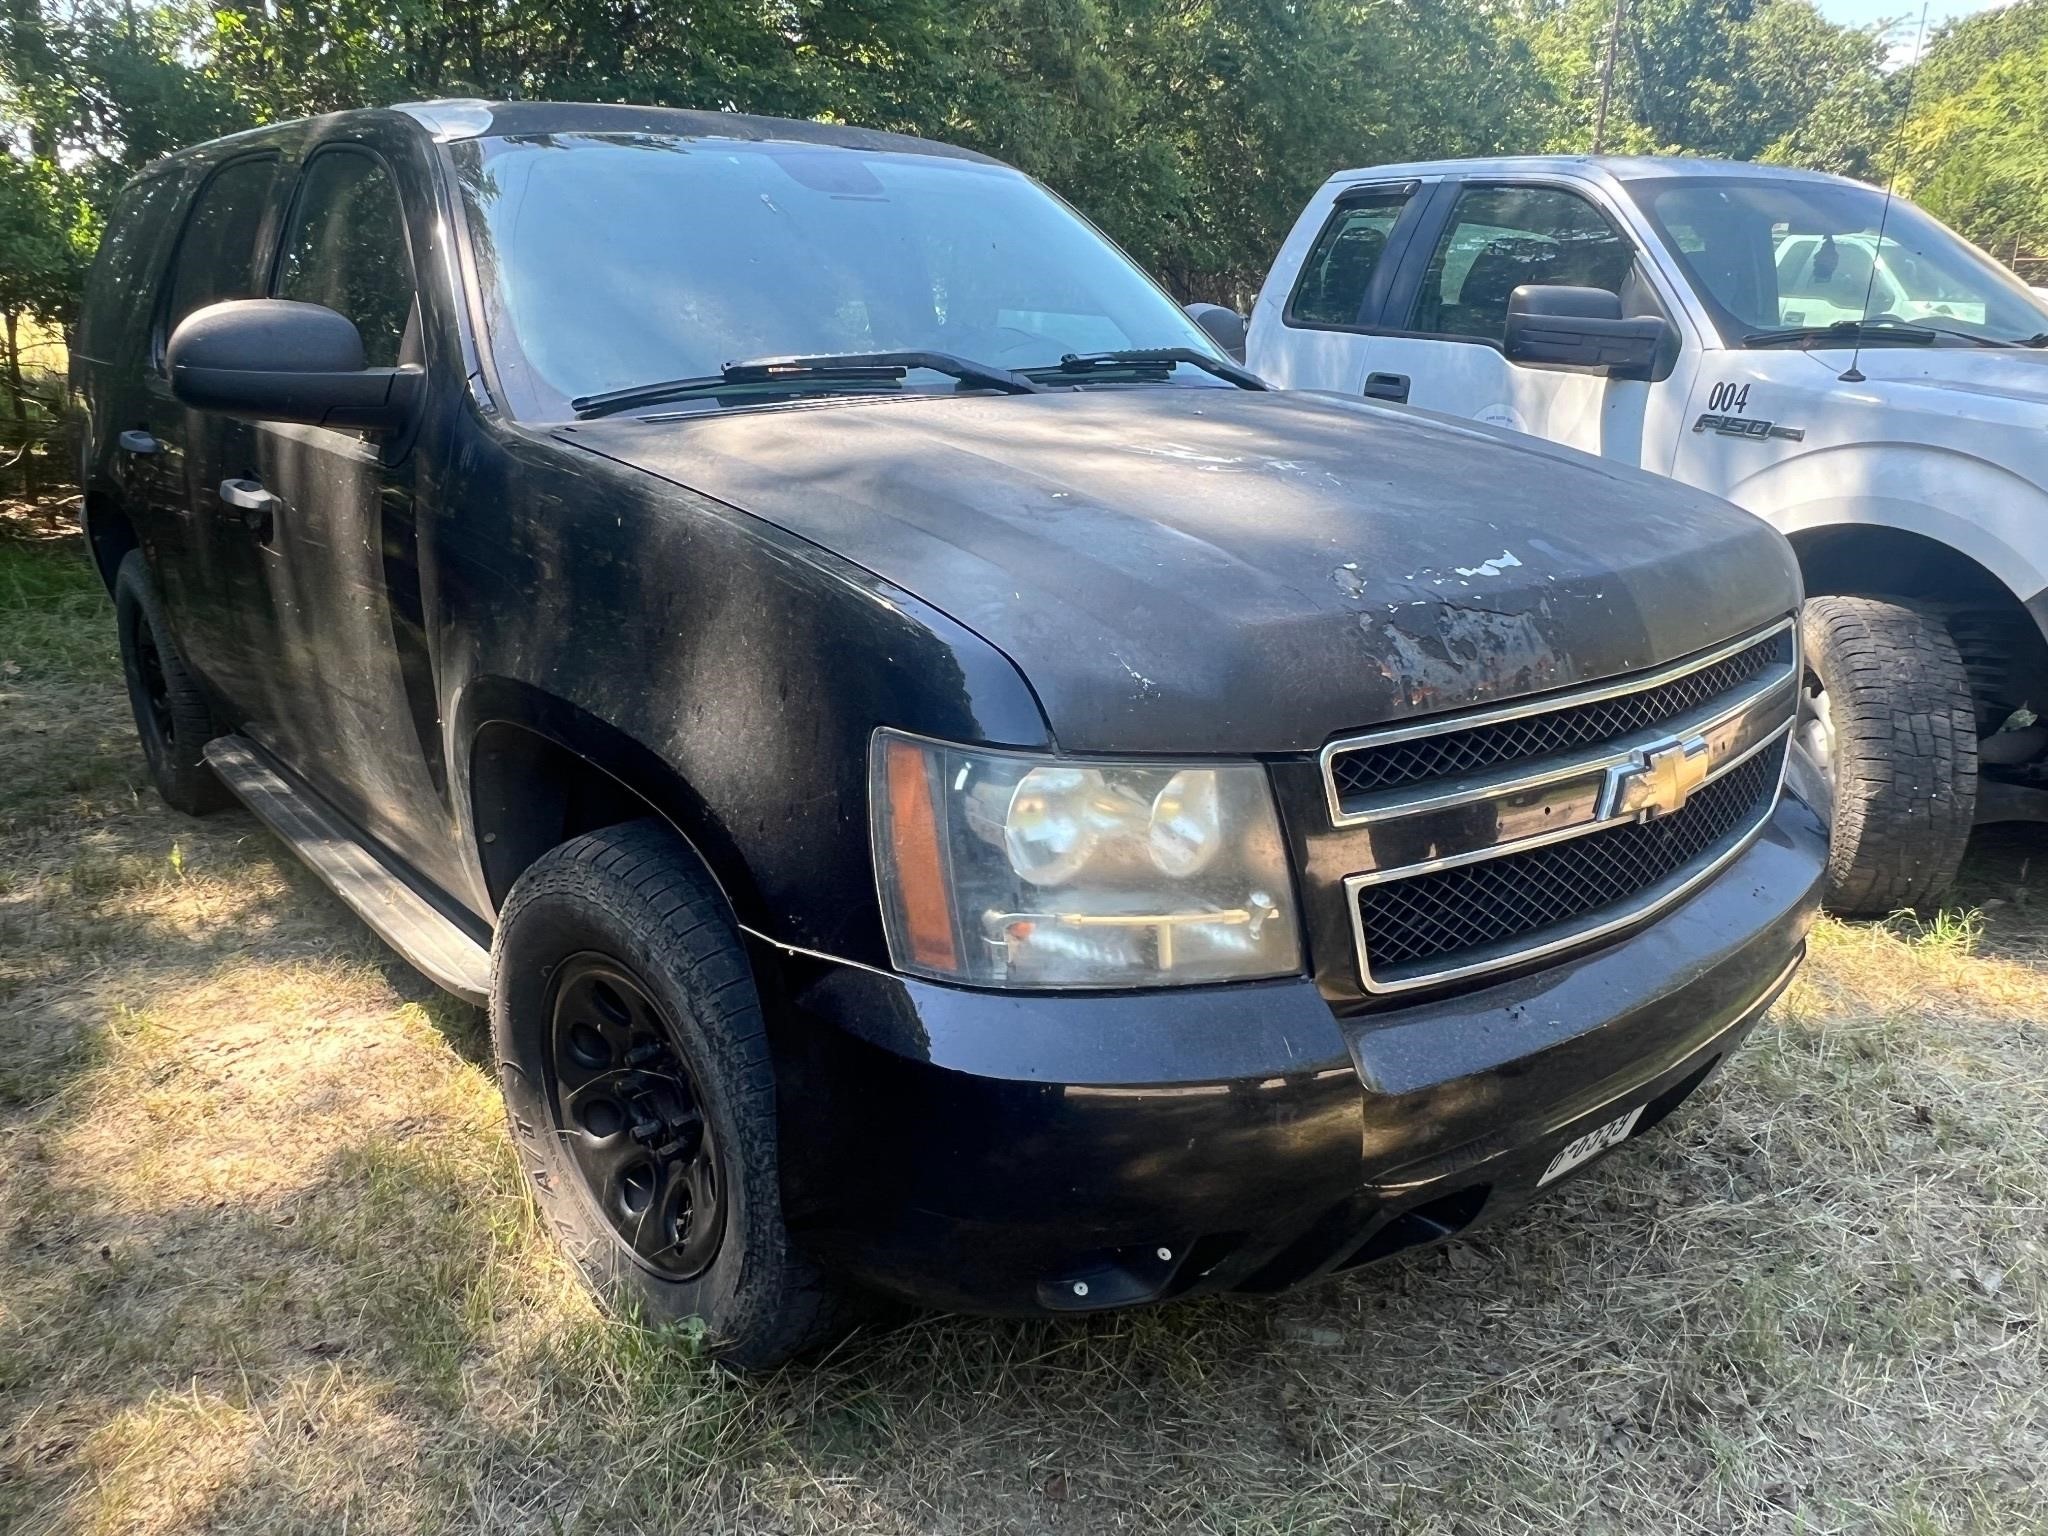 2008 CHEVY TAHOE RETIRED POLICE CAR RUNS & DRIVES